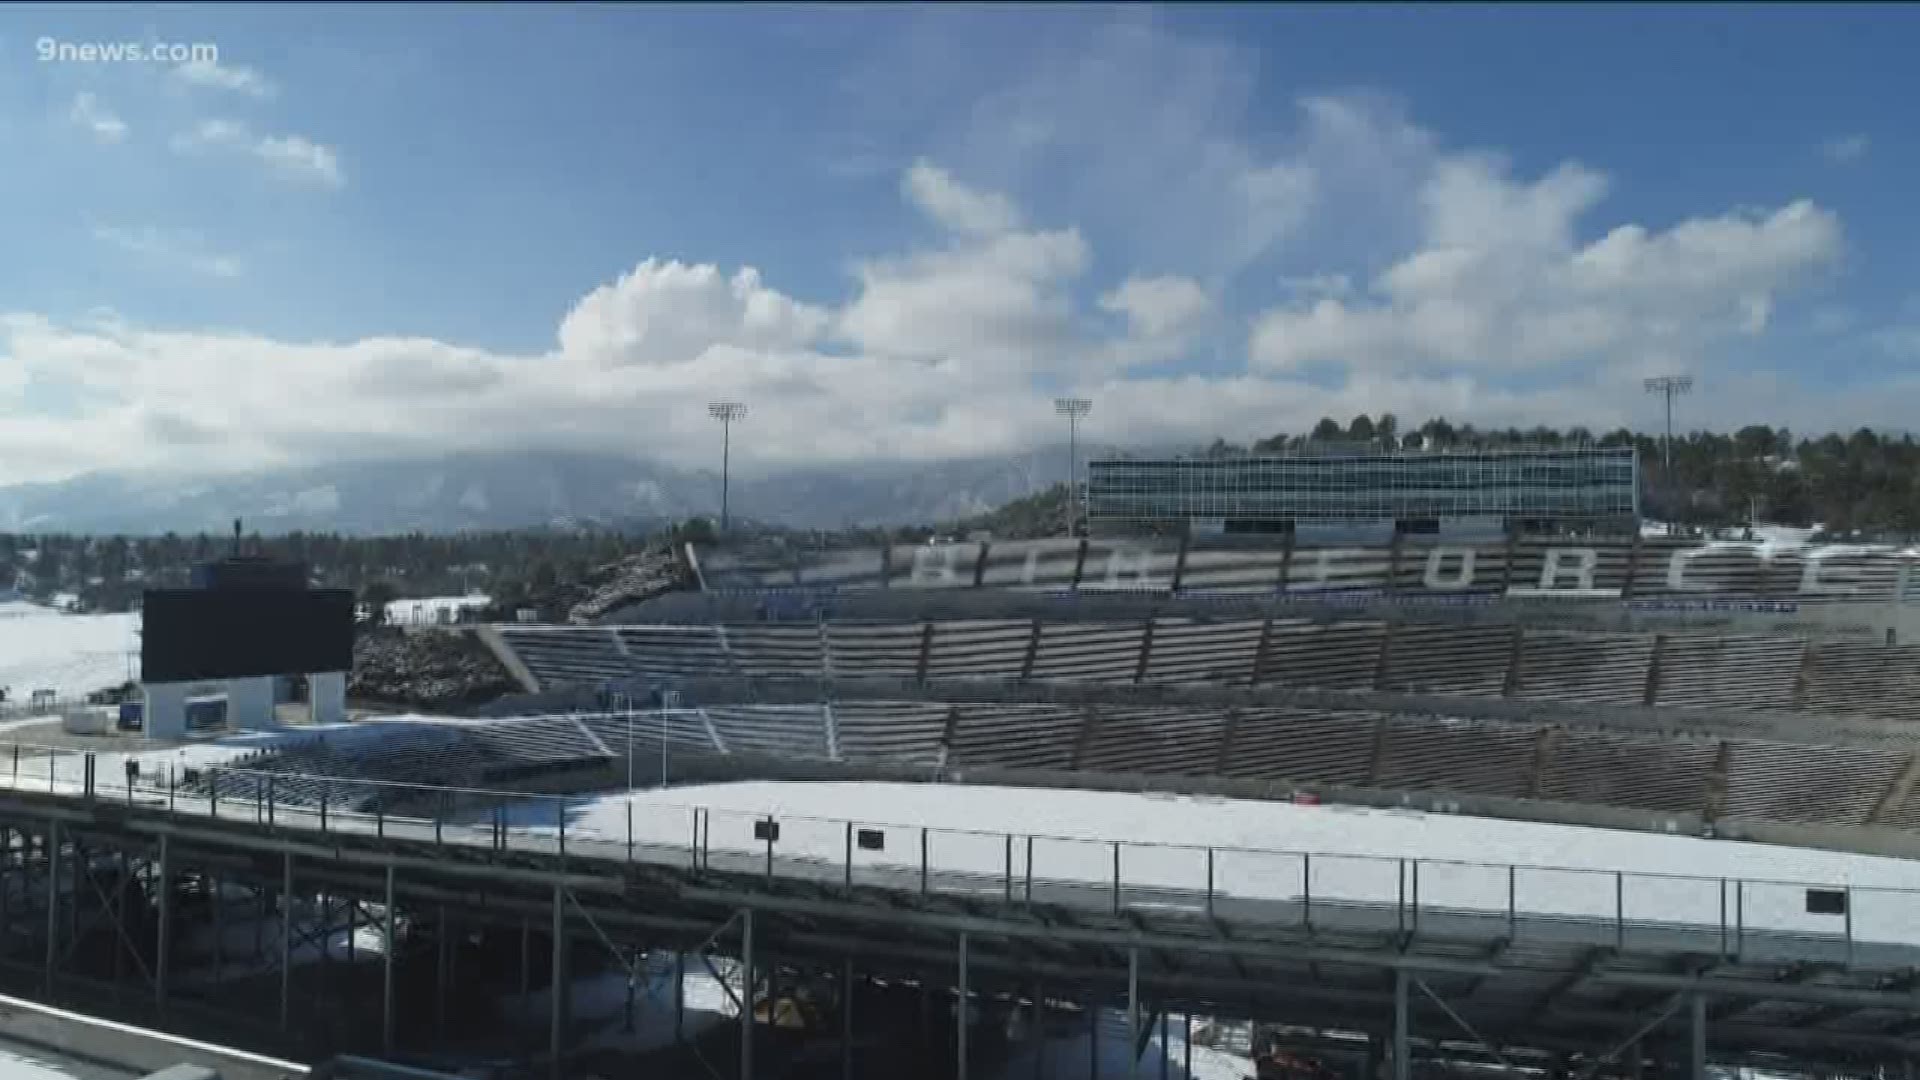 The Colorado Avalanche will be playing a Stadium Series game vs. the L.A. Kings at Falcon Stadium at the U.S. Air Force Academy in Colorado Springs on Feb. 15, 2020.